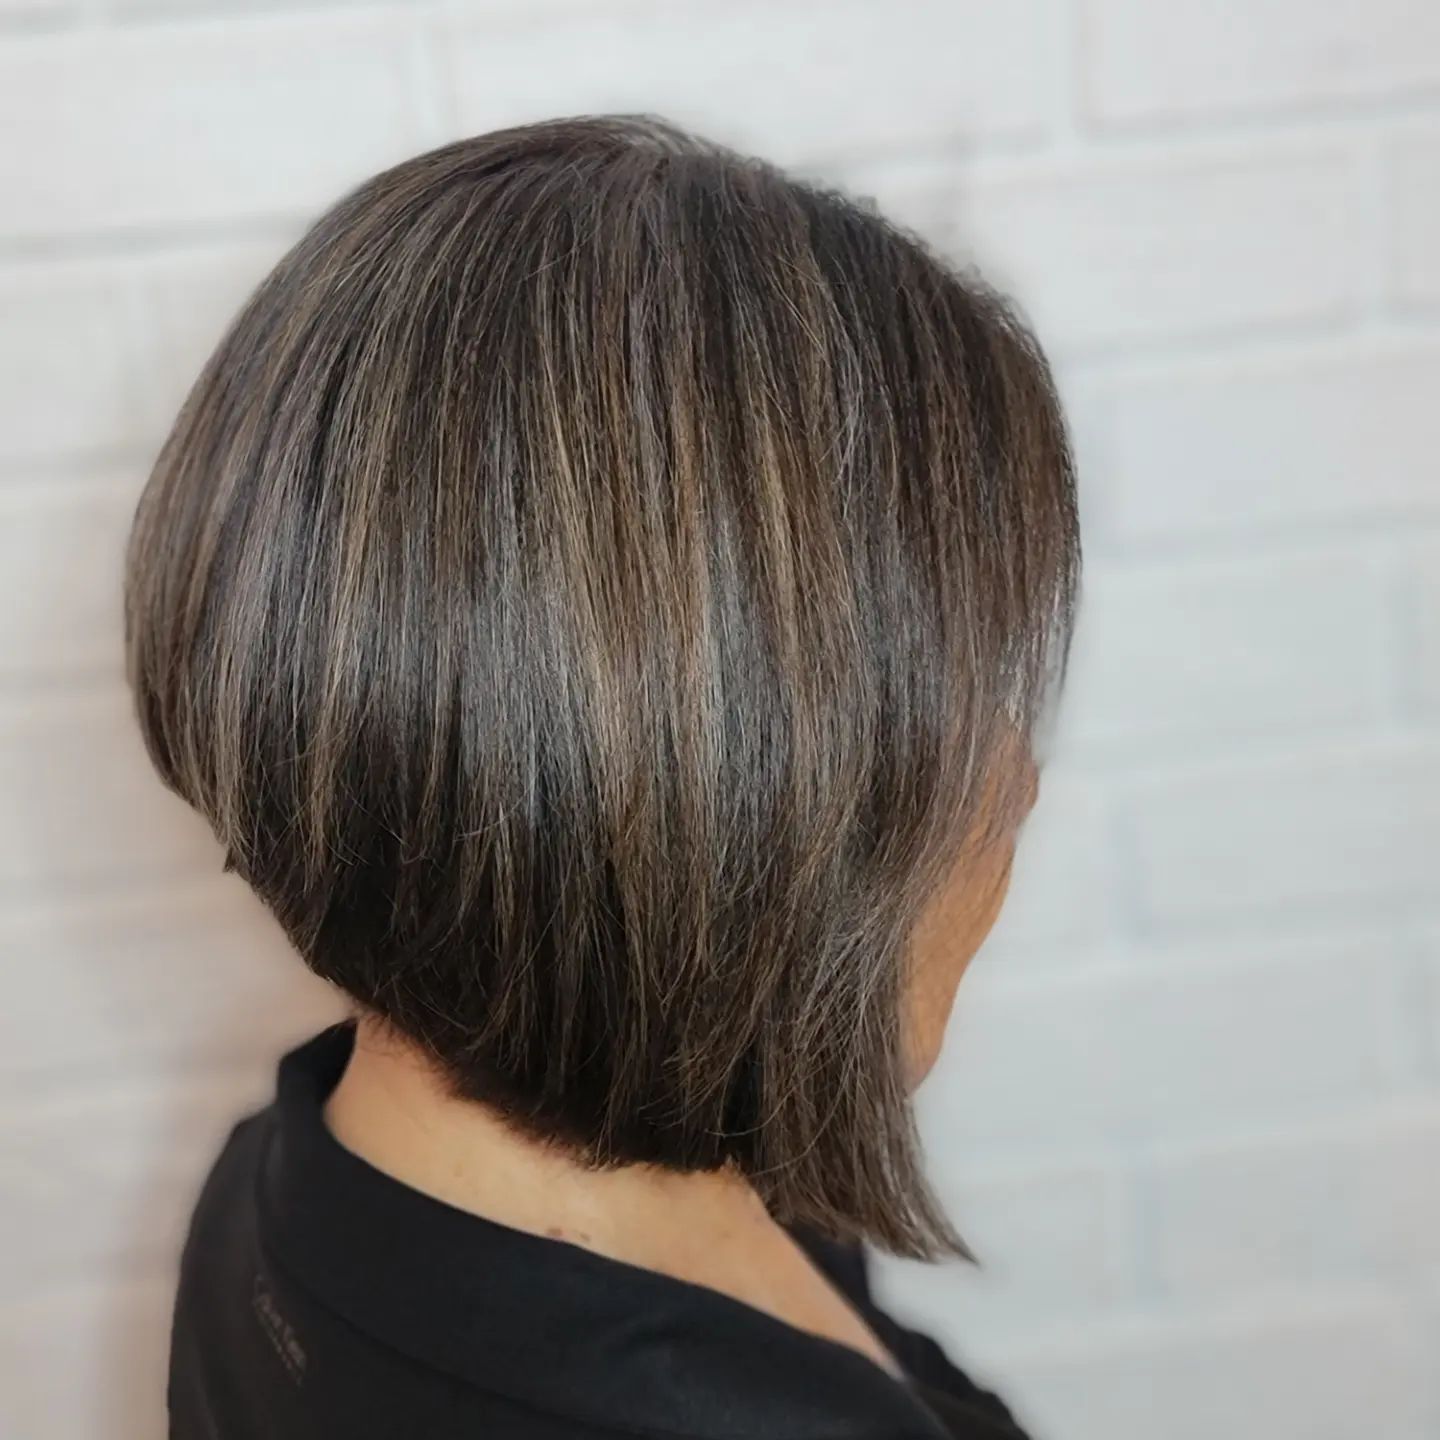 Stacked Bob 110 Long stacked bob | Medium length stacked bob | Pictures of stacked bob haircuts front and back Stacked Bob Hairstyles for Women